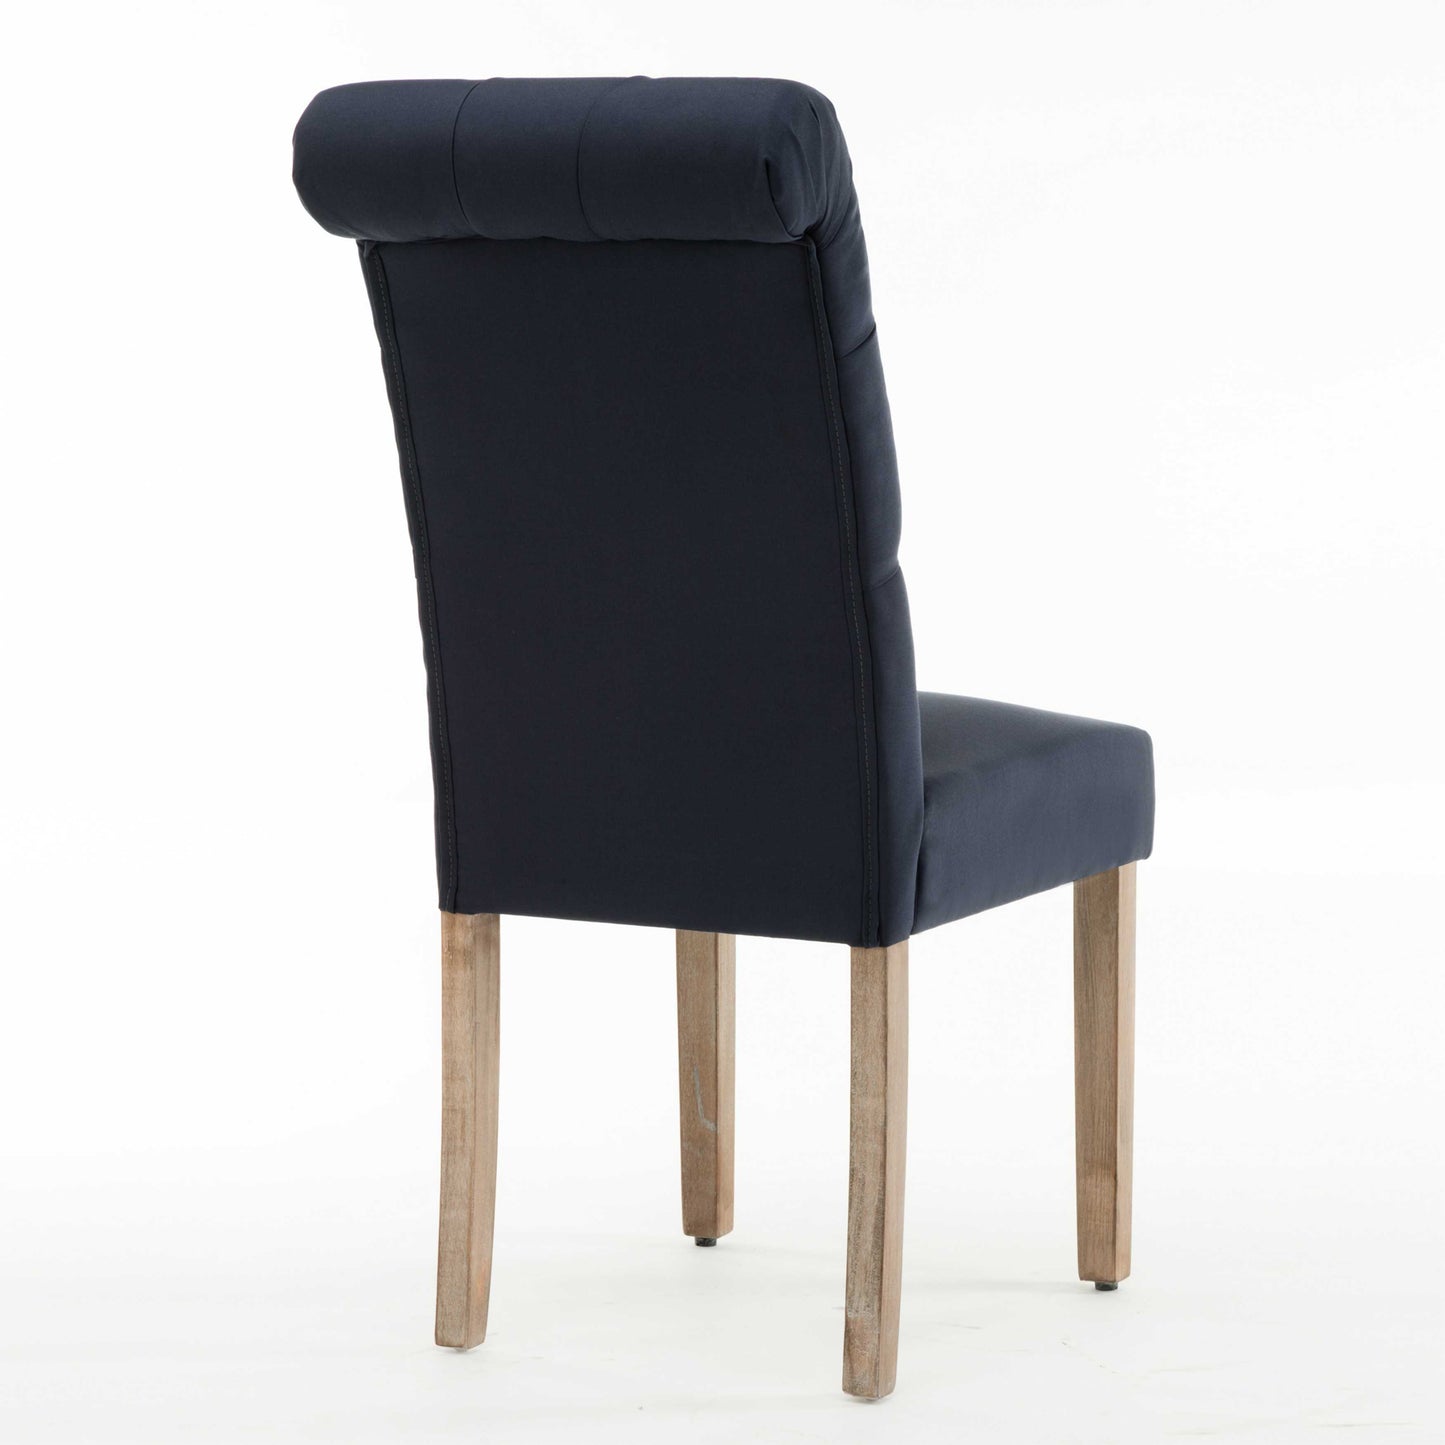 Blue Roll Top Tufted Linen Fabric Modern Dining Chair In A Set Of 2